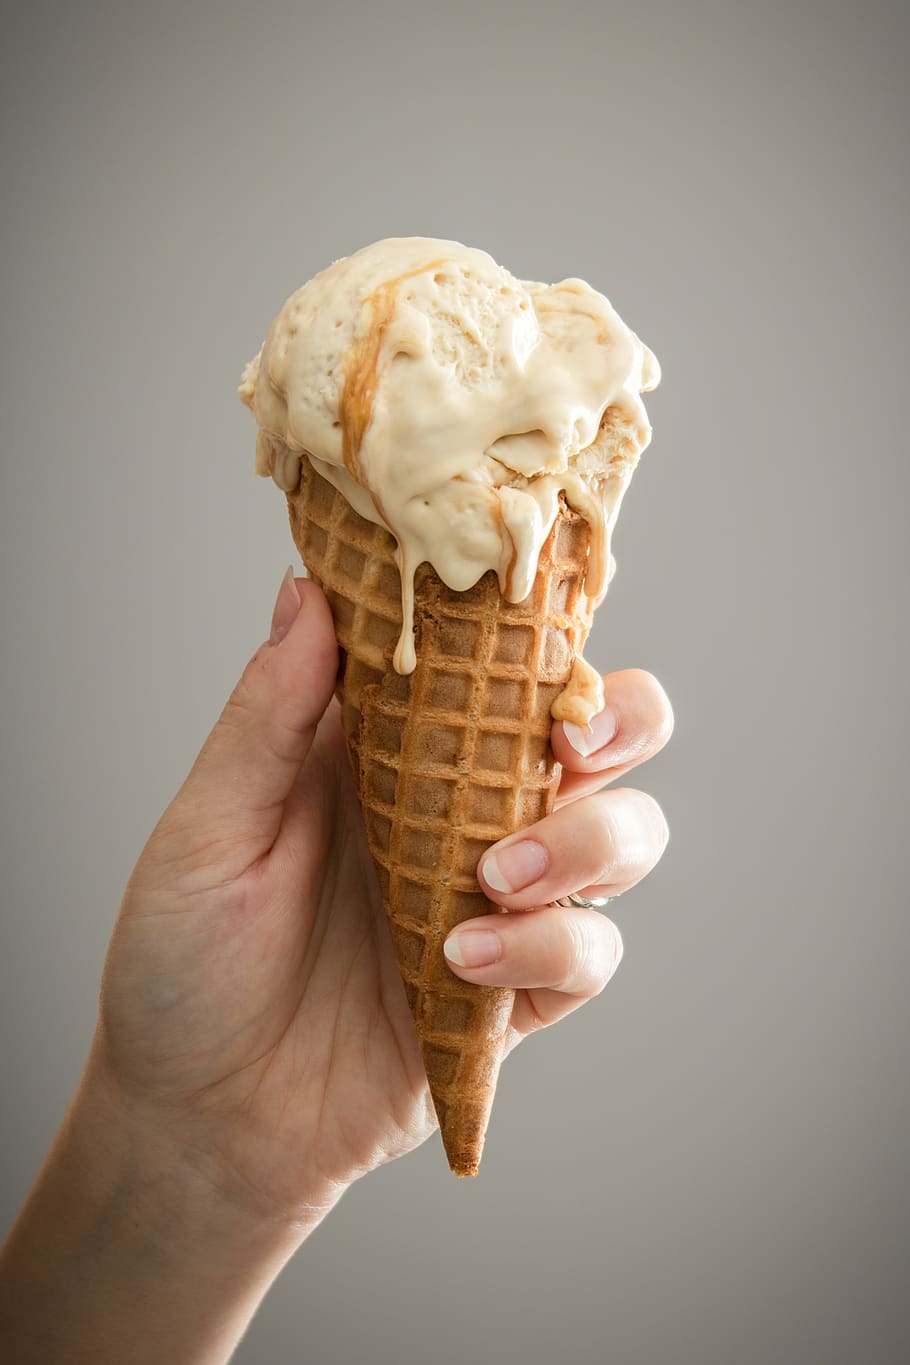 white ice cream on brown cone, food and drink, human hand, ice cream cone